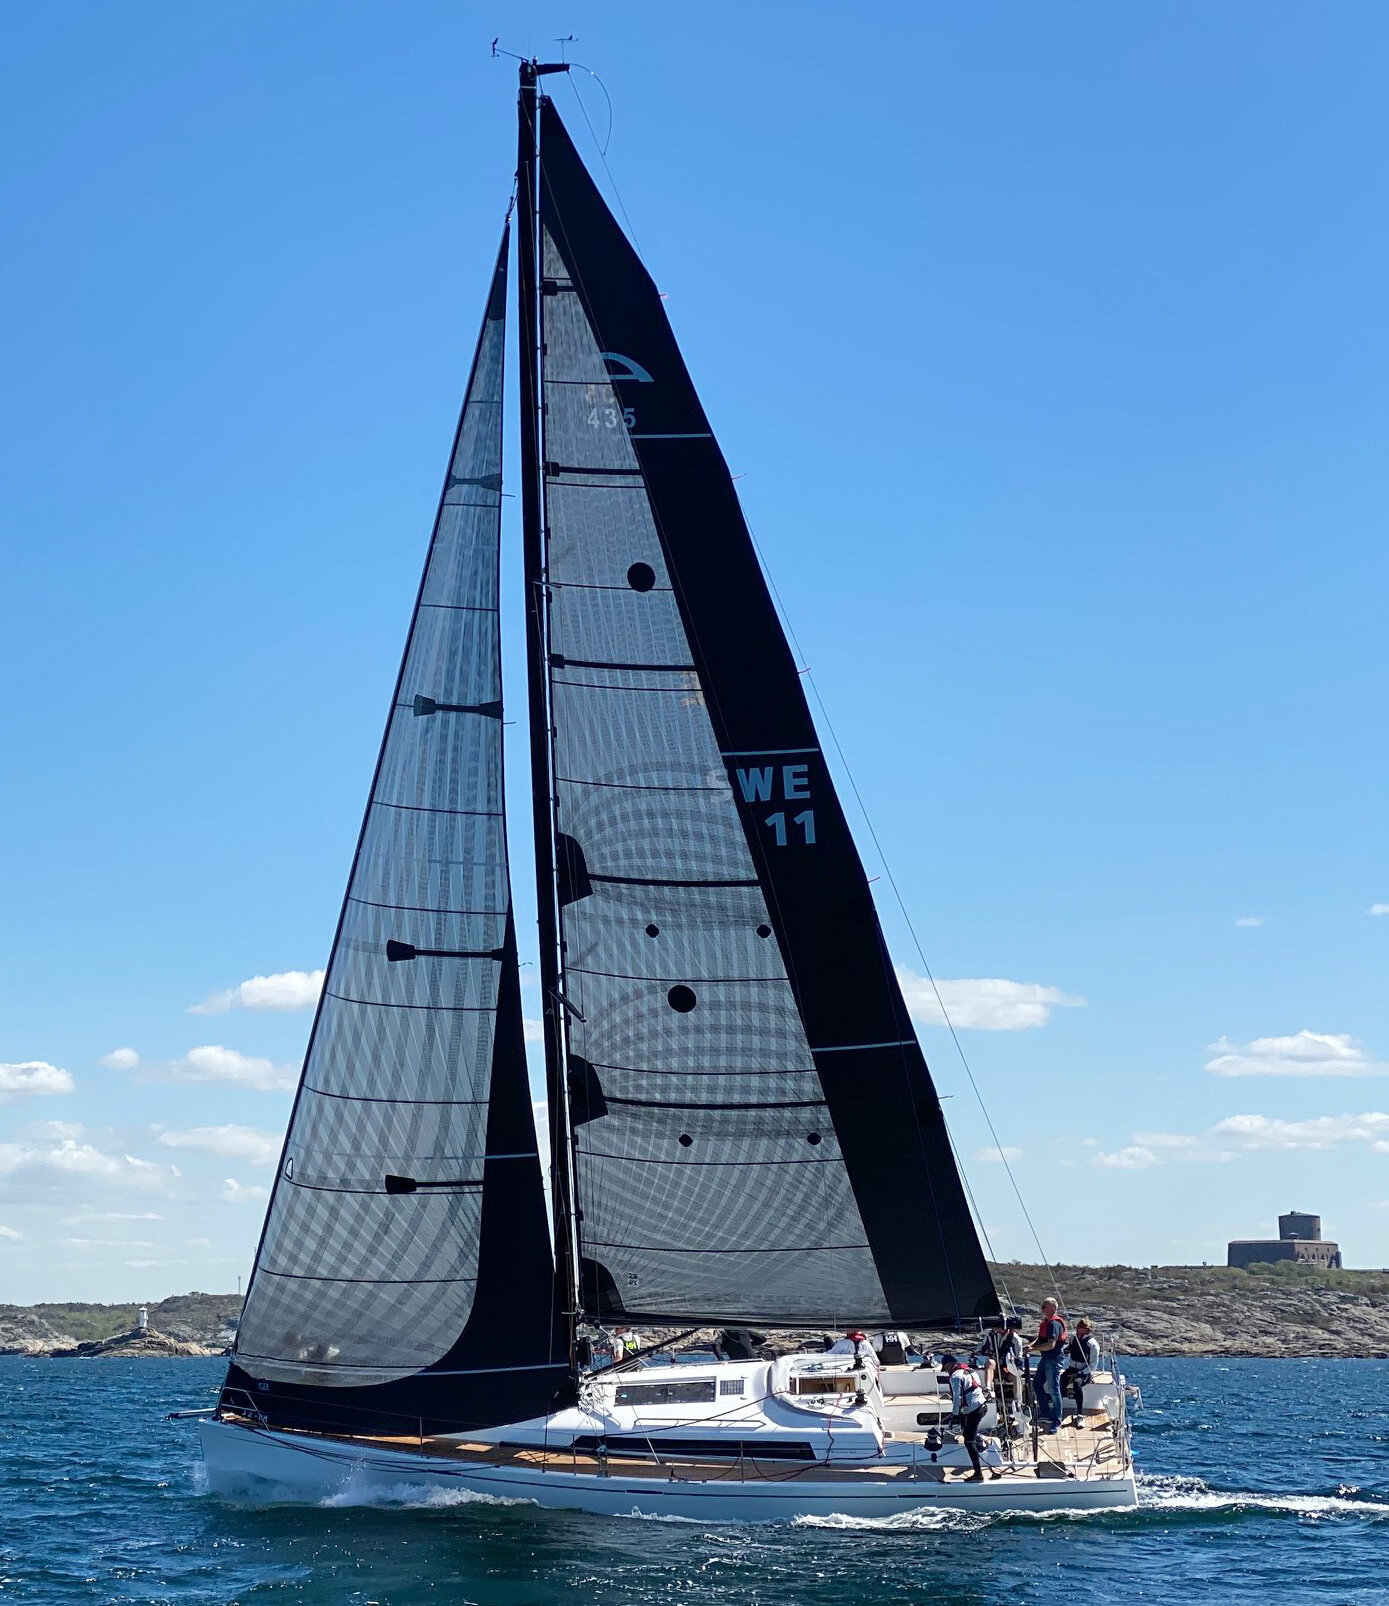 An Arcona 435 with X-Drive® carbon sails. Both sails have partial taffeta layers on their leeches for extended durability. The jib has minimal extra taffeta to save weight. Photo by Peter Gustaffson/Blur.se